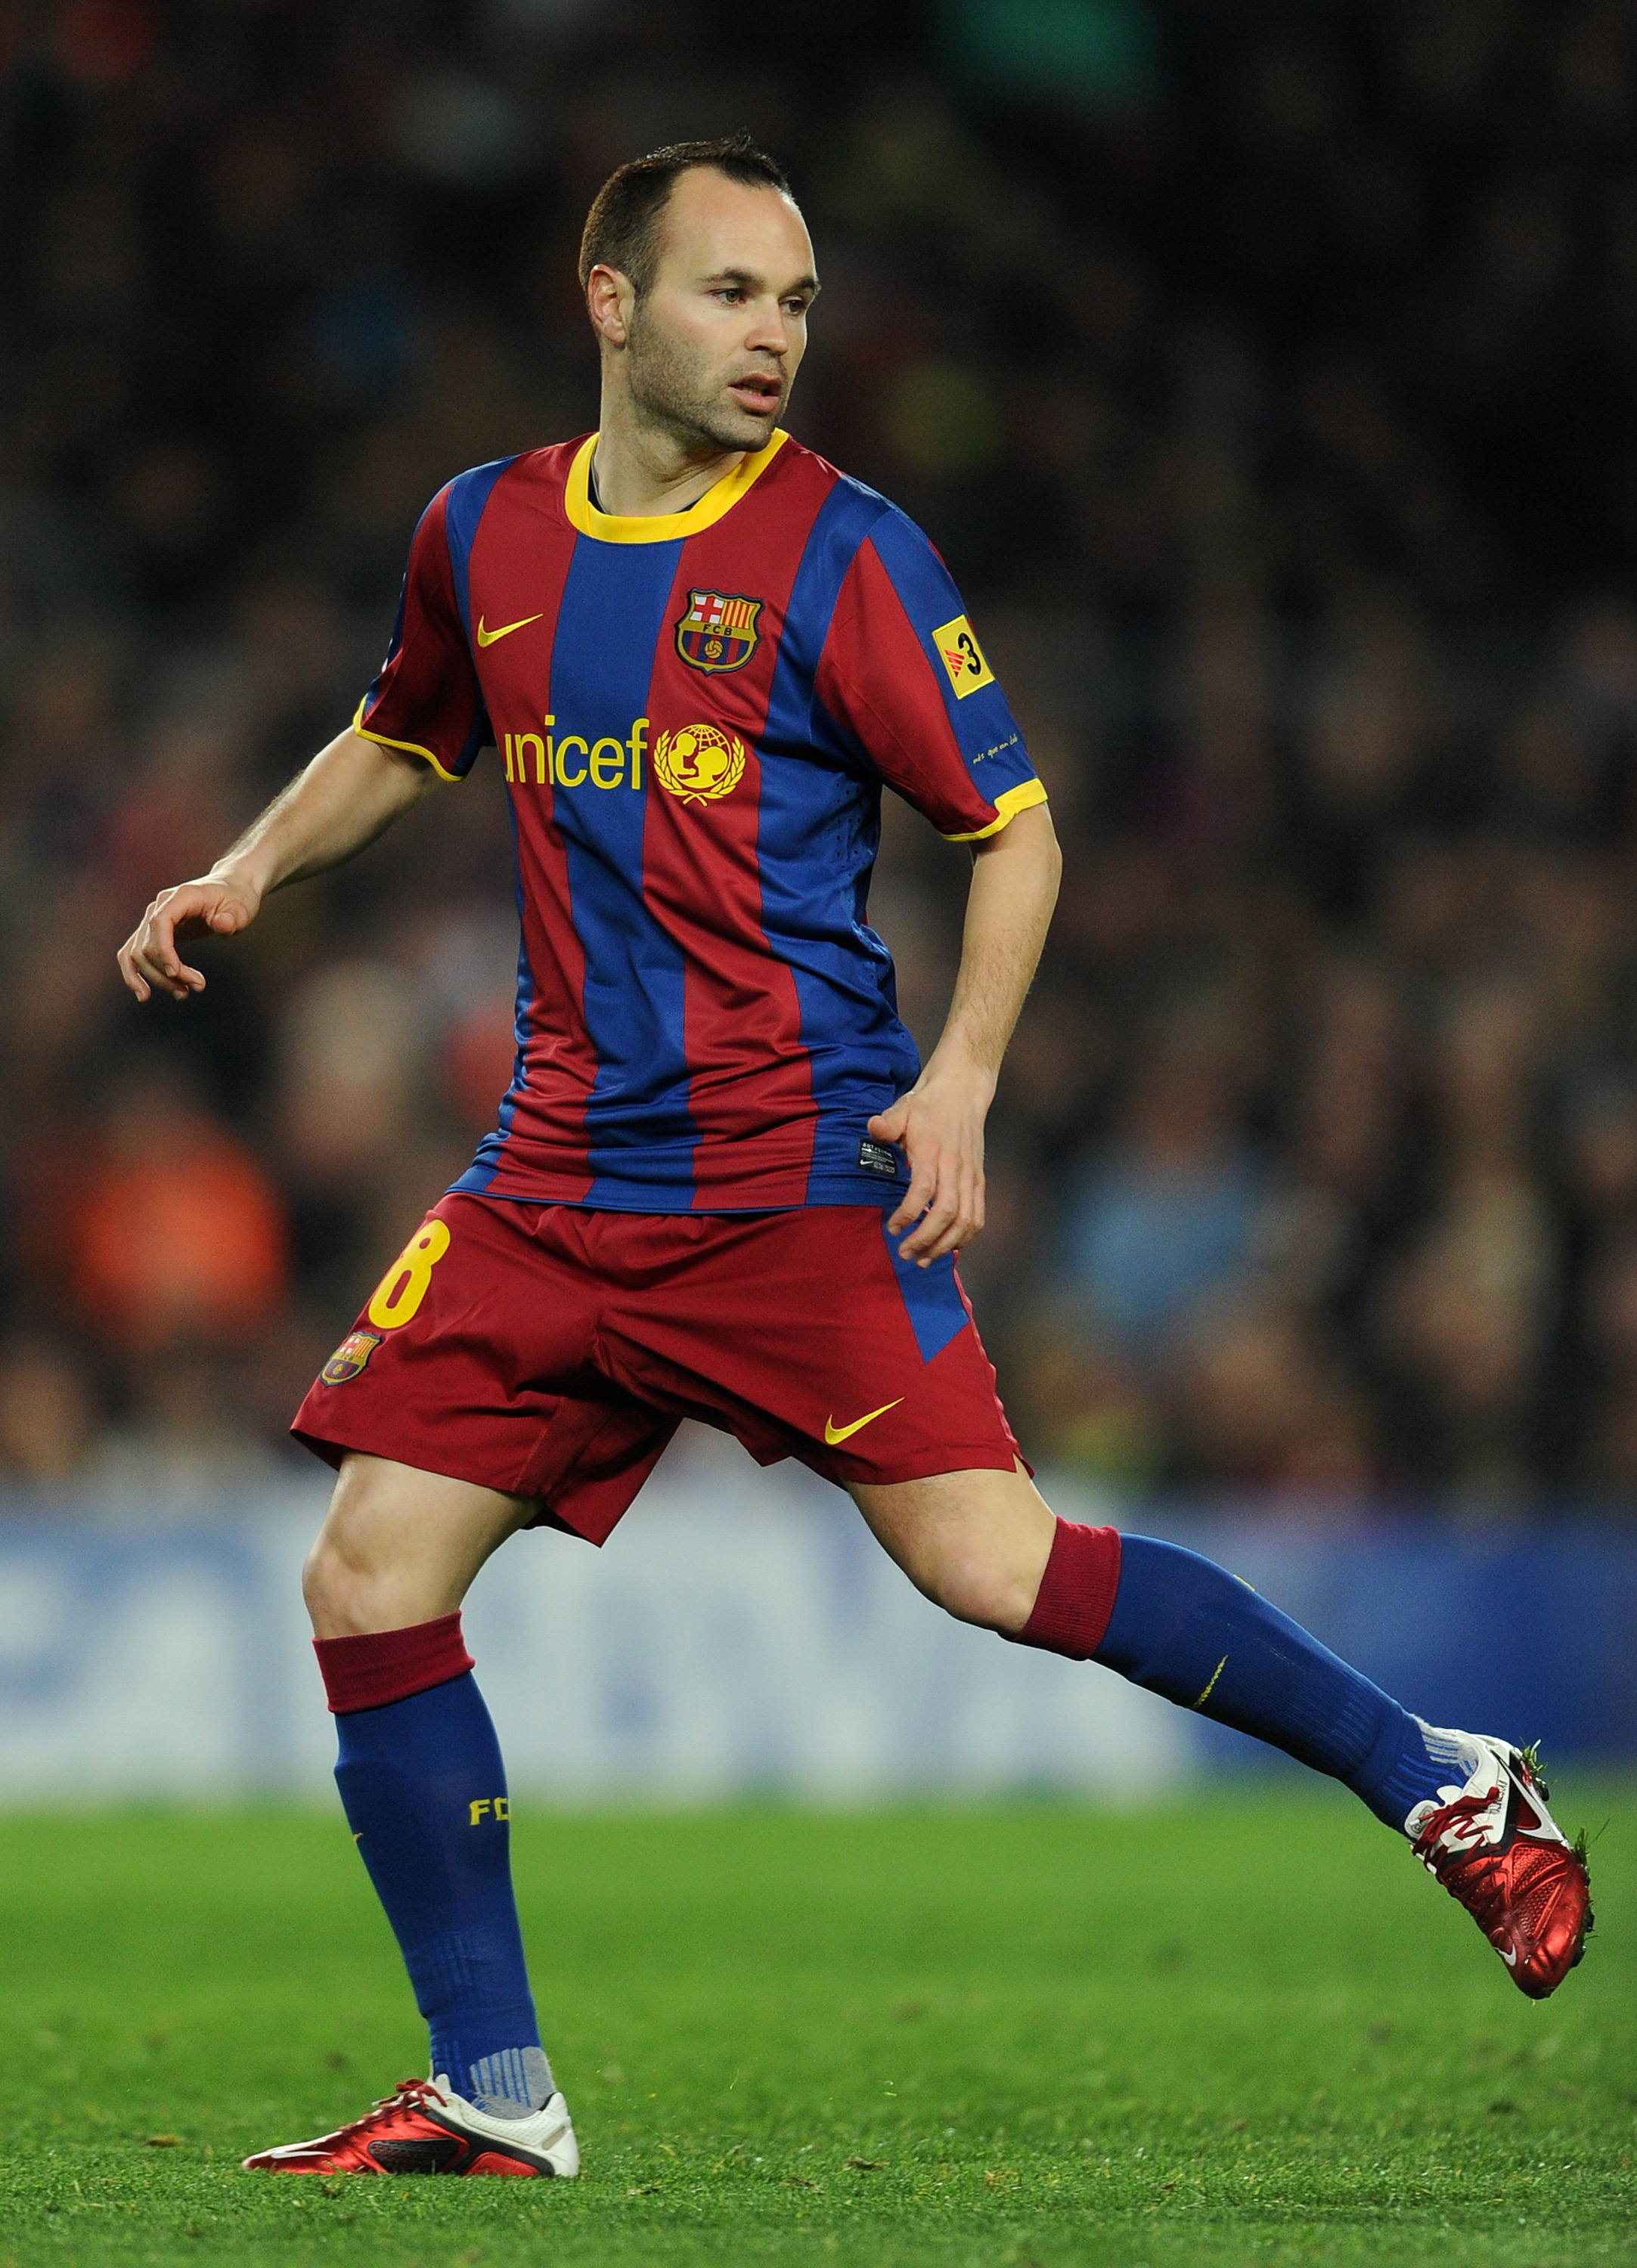 BARCELONA, SPAIN - MARCH 05:  Andres Iniesta of Barcelona in action during the la Liga match between Barcelona and Real Zaragoza at the Camp Nou stadium on March 5, 2011 in Barcelona, Spain.  (Photo by Jasper Juinen/Getty Images)